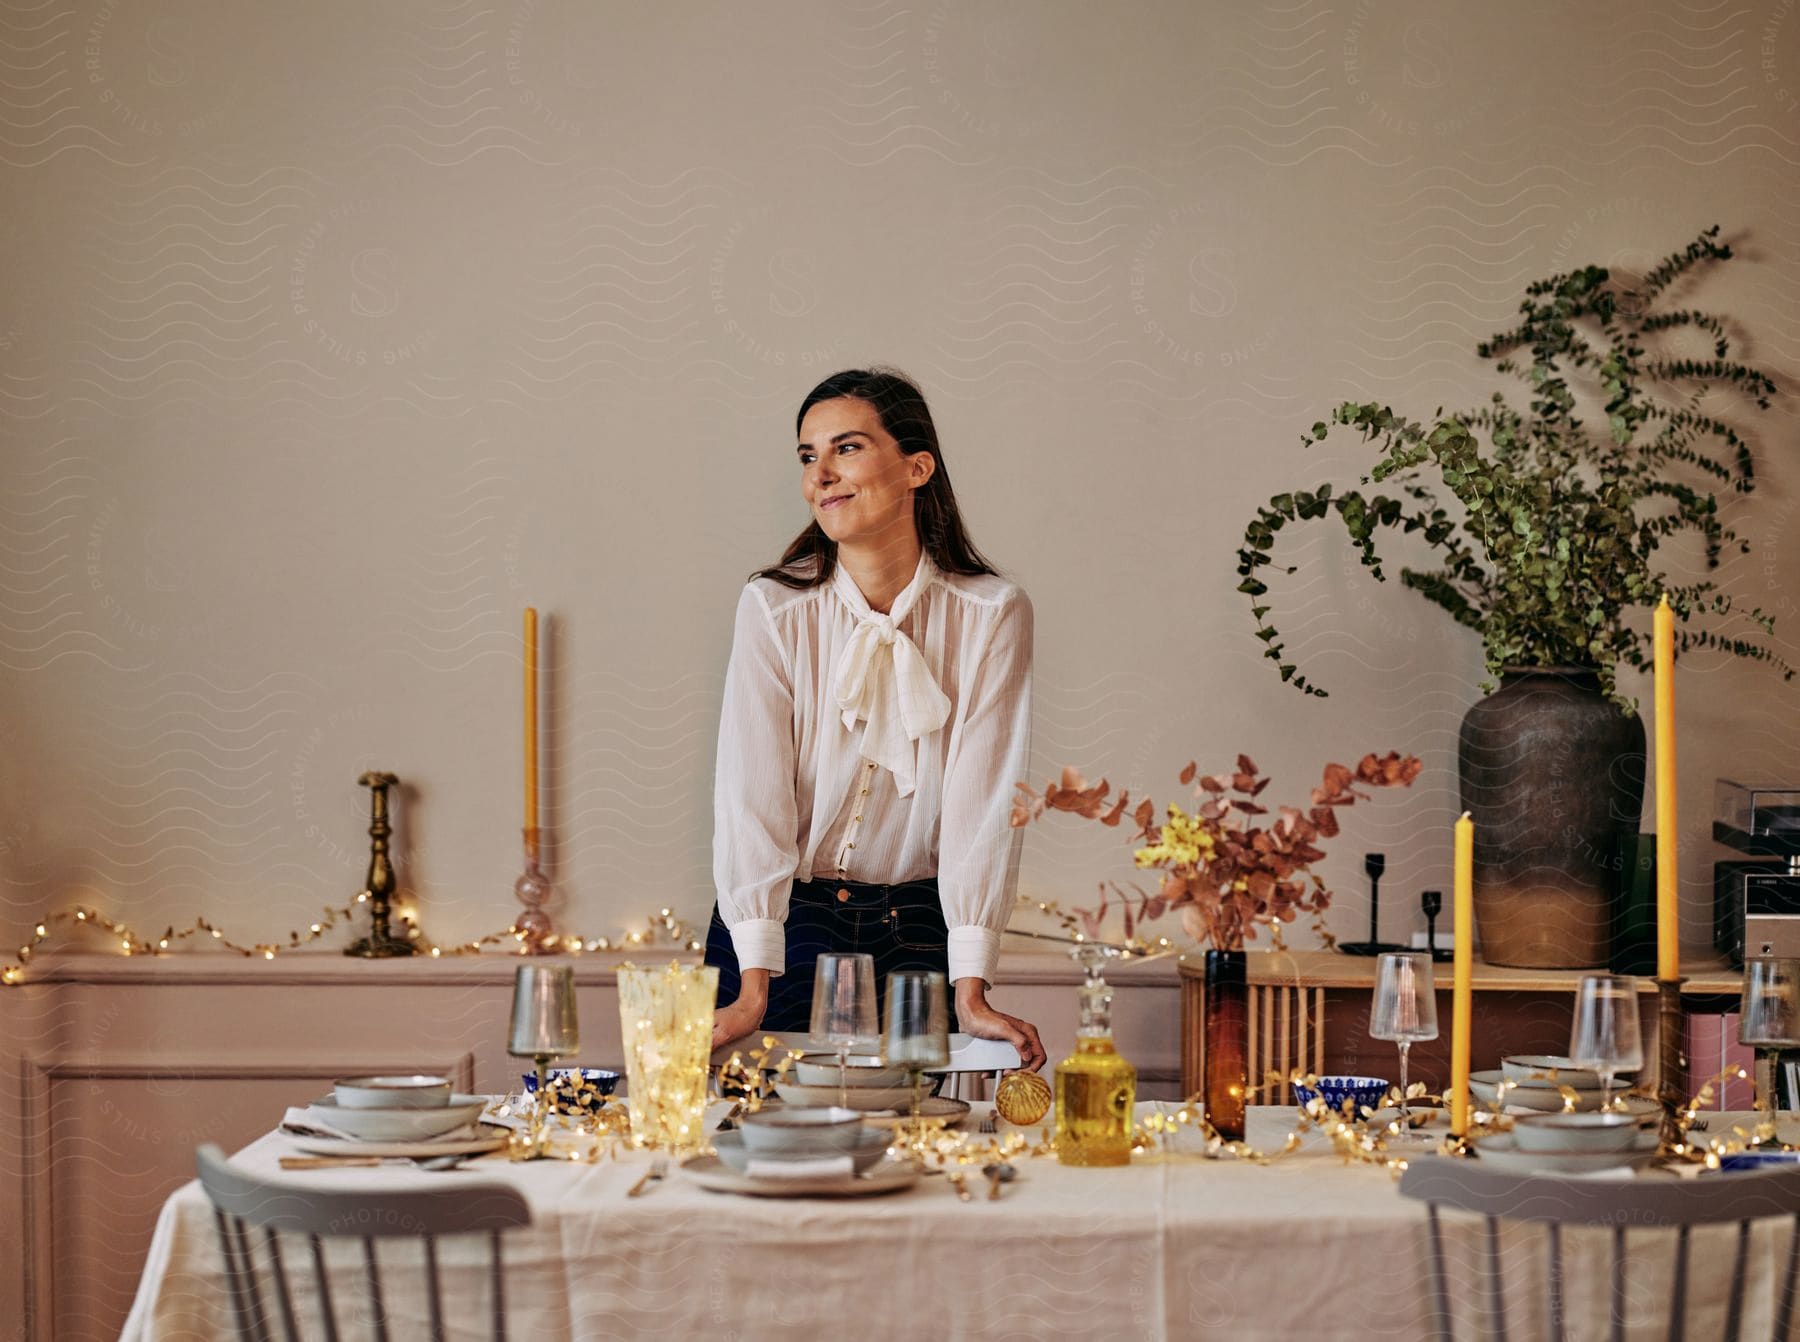 A woman in white clothes is smiling and looking to the right while setting a table with dishes.